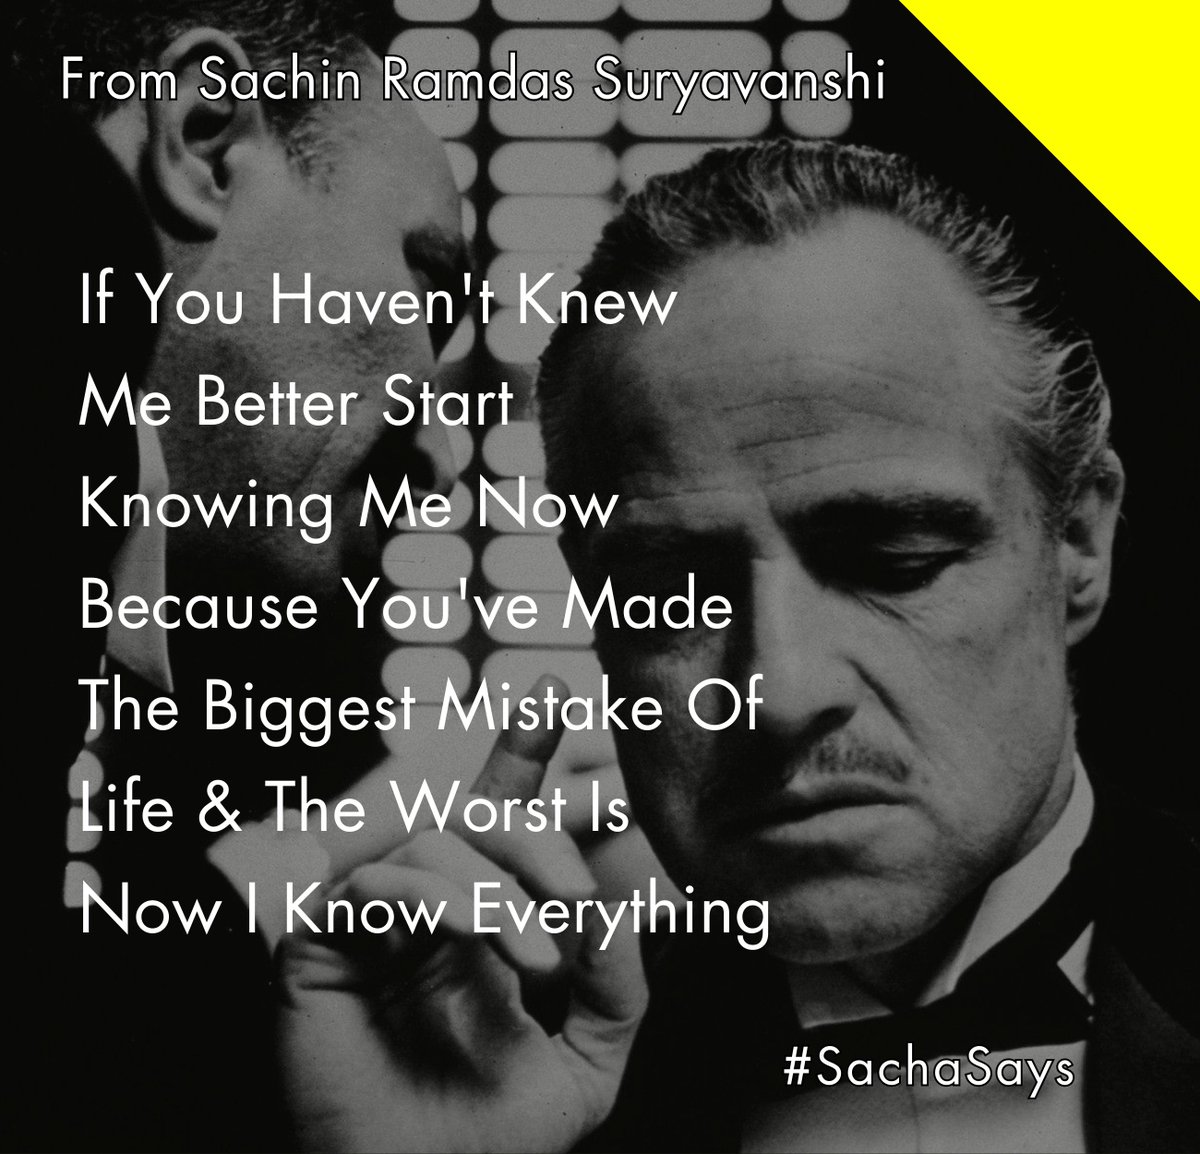 Sammy Wine Or Whisky ?
Sacha Everyone Knows You Neither Drink Nor Smoke. You Act Too Much Sacha
Sammy I Ask Your Taste Not Mine :)

#SachaSays
- Quotes From Sachin Ramdas Suryavanshi

#englishquotes #shortstories #talesofthemoment #mimarathi #motivationalquotes #मराठी #marathi